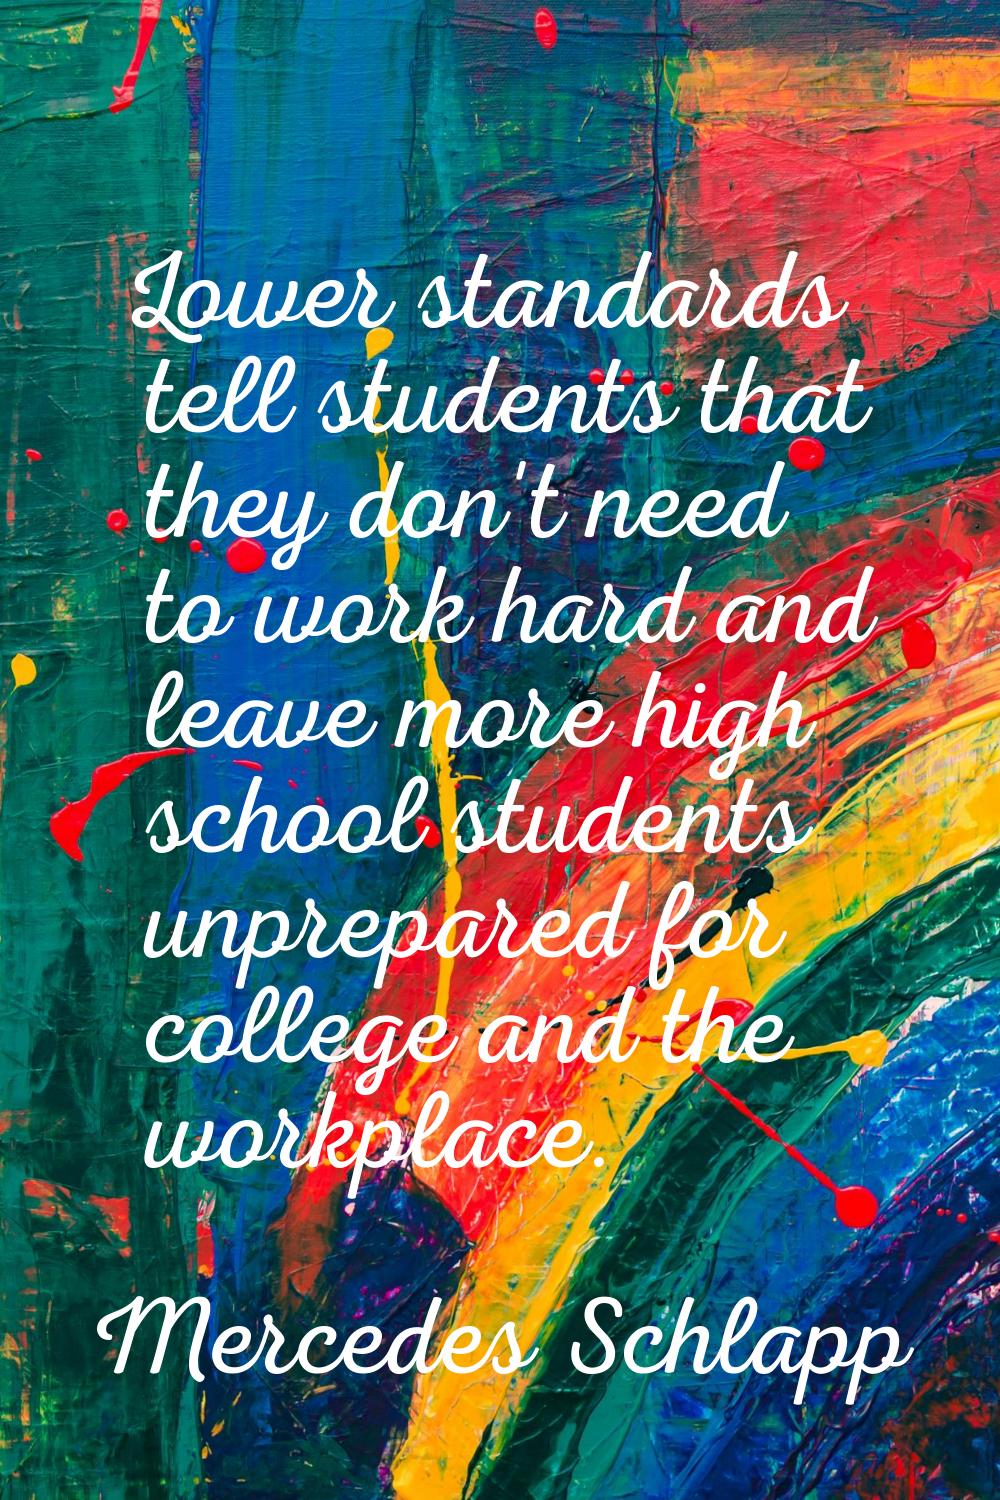 Lower standards tell students that they don't need to work hard and leave more high school students